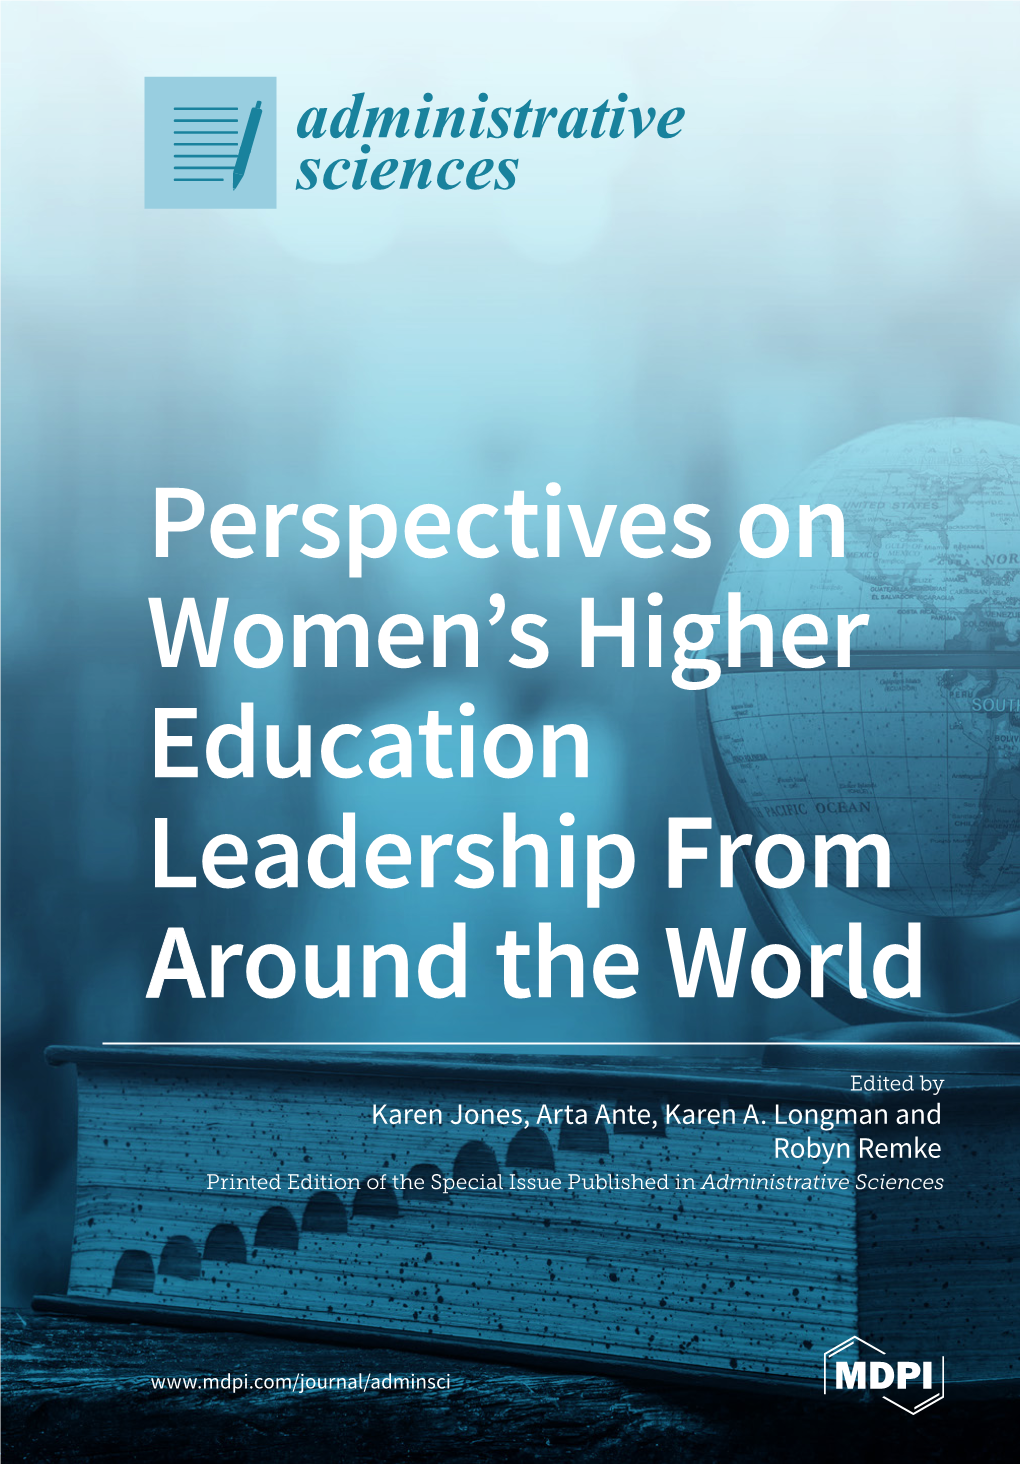 Perspectives on Women's Higher Education Leadership from Around